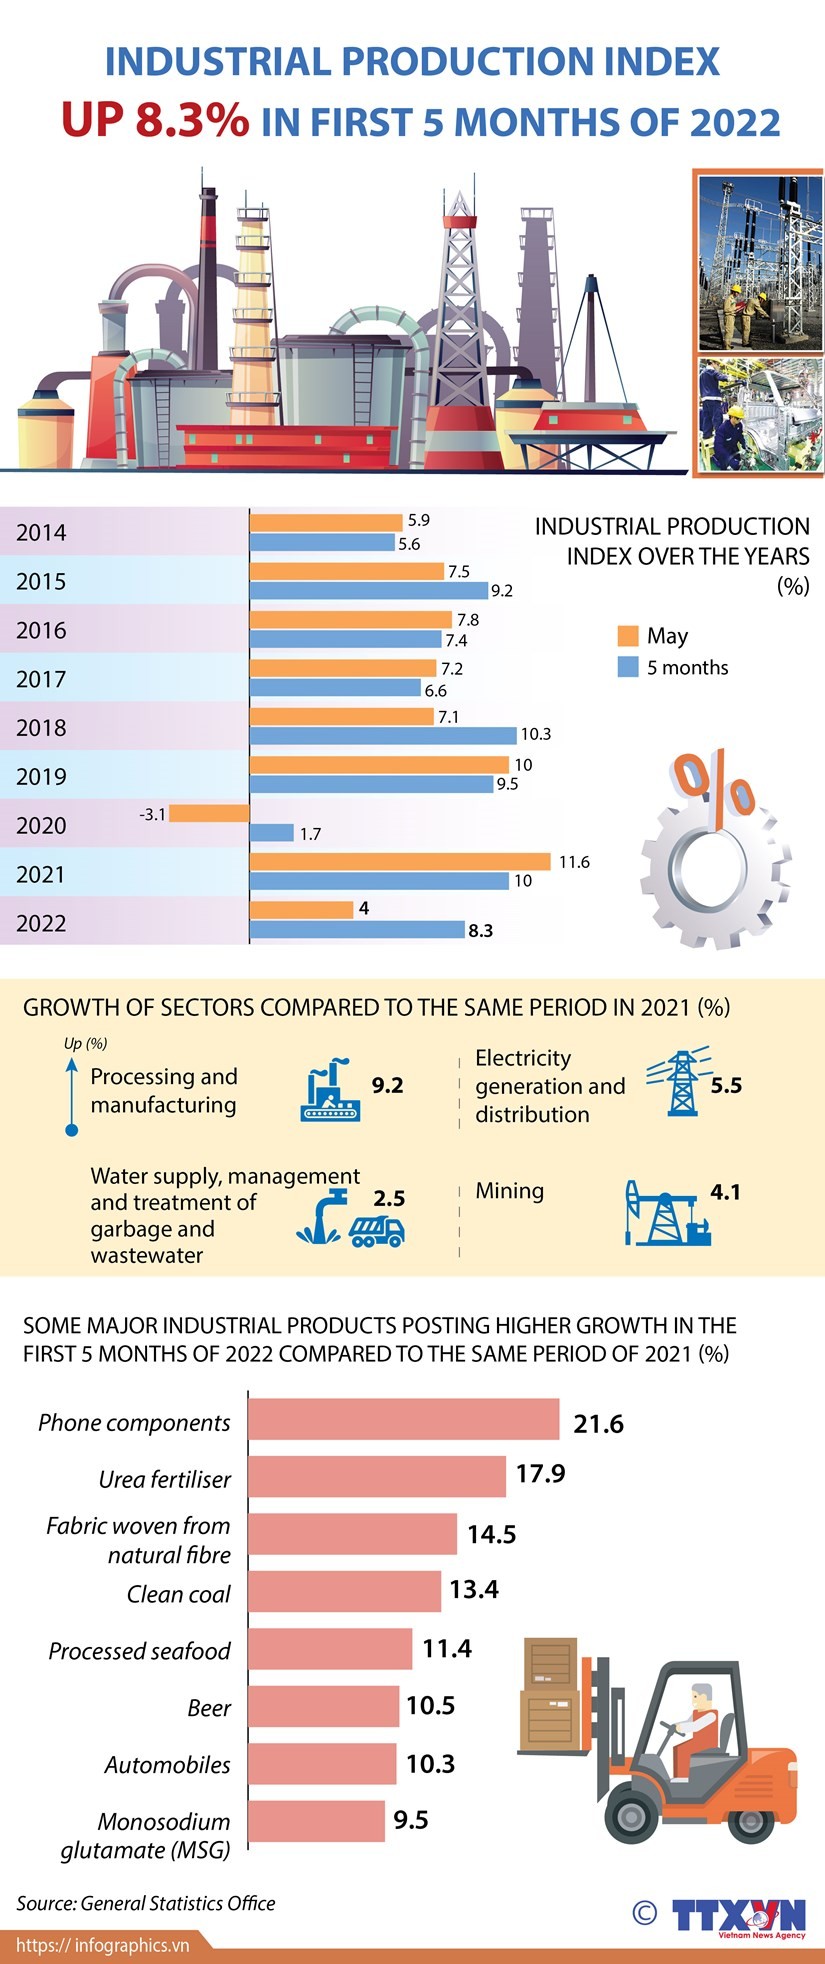 Industrial production index up 8.3% in first 5 months of 2022